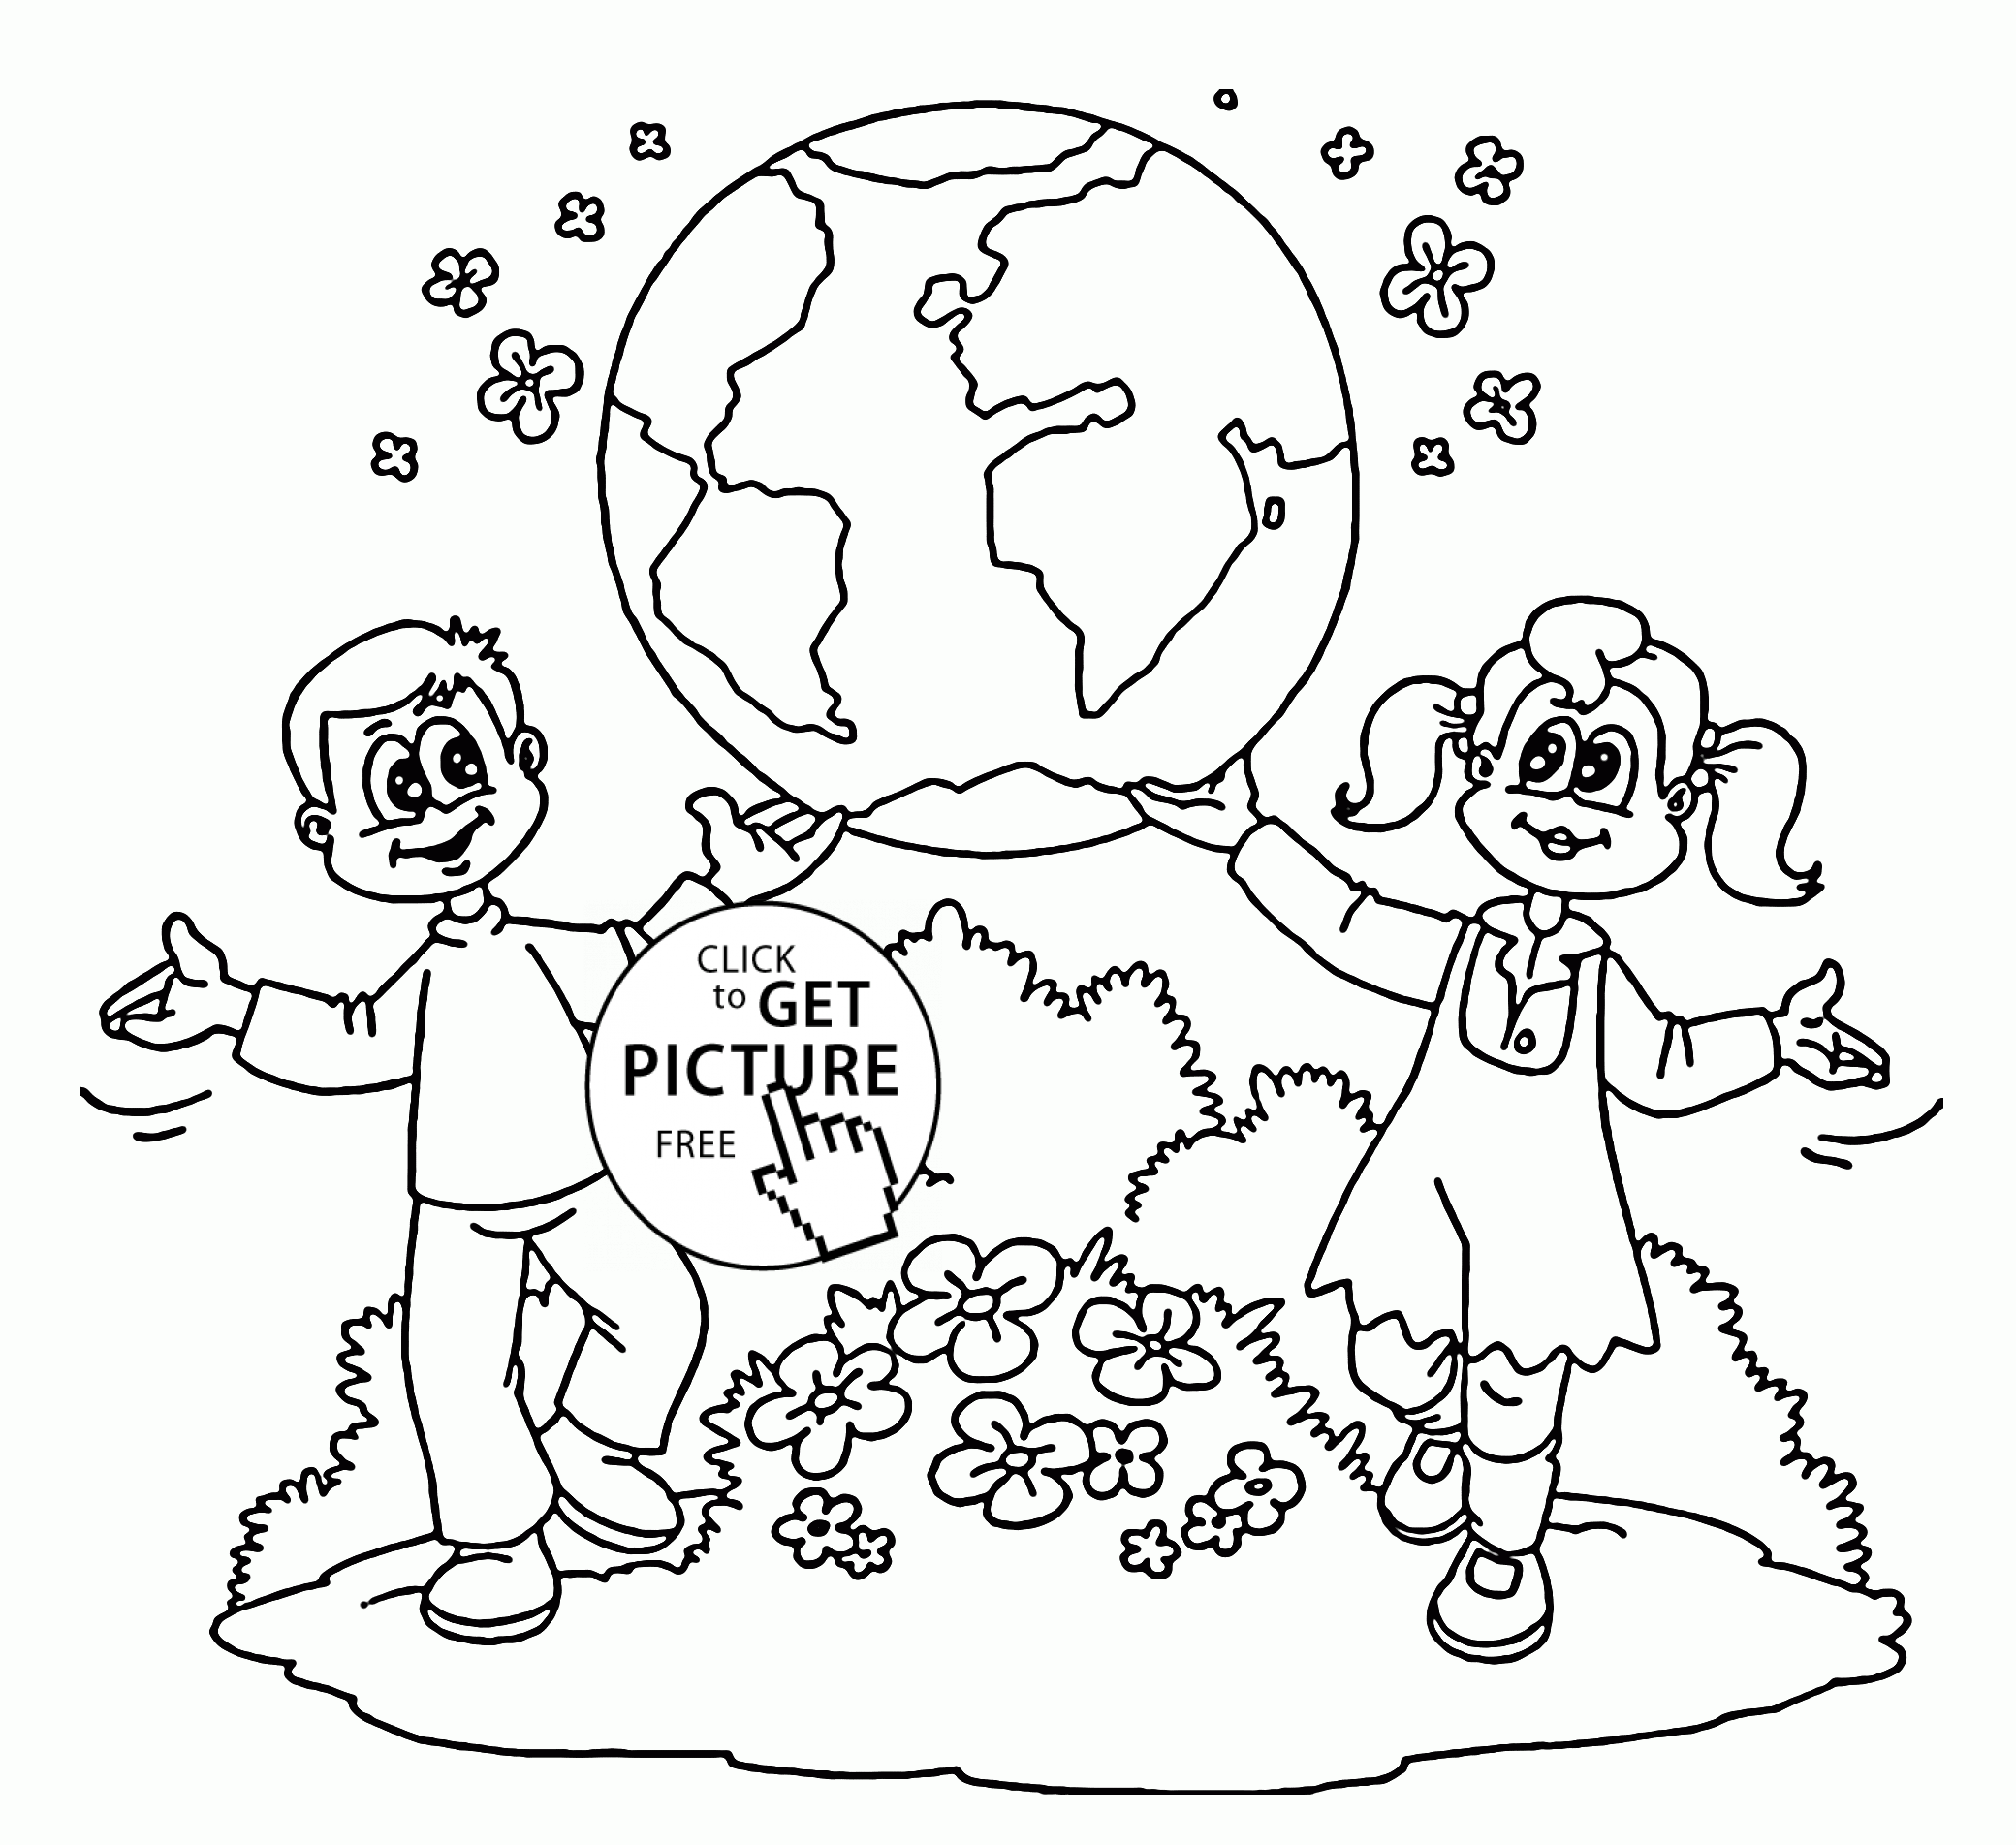 Save Earth Coloring Pages - Coloring Home